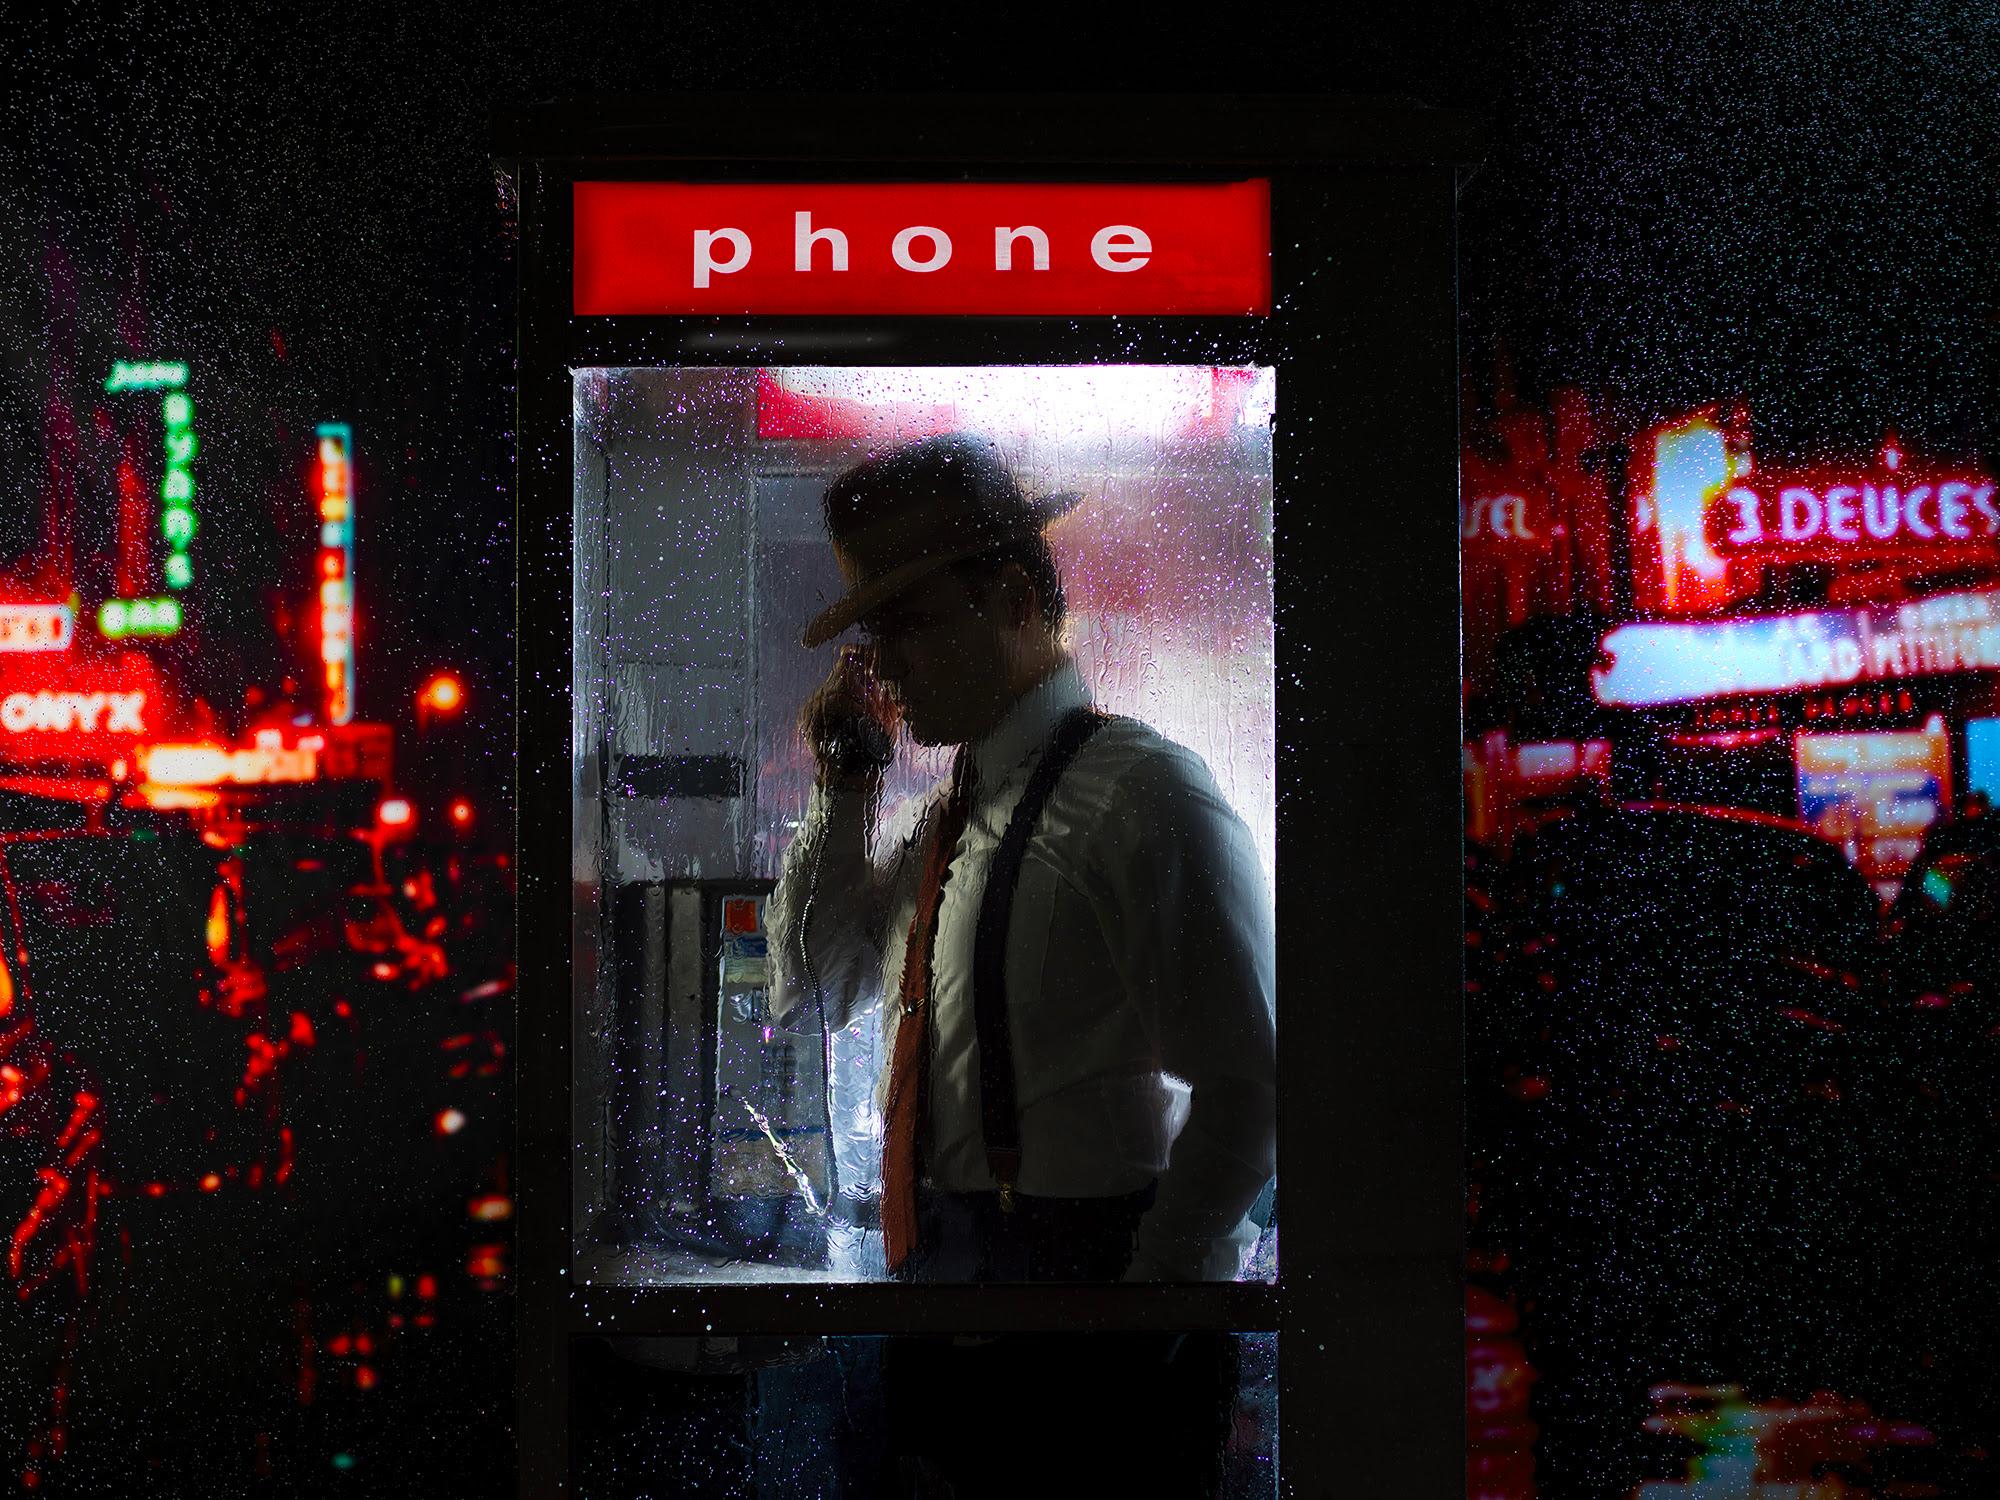 Tyler Shields Black and White Photograph - The Man in the Phone Booth (56" x 76")